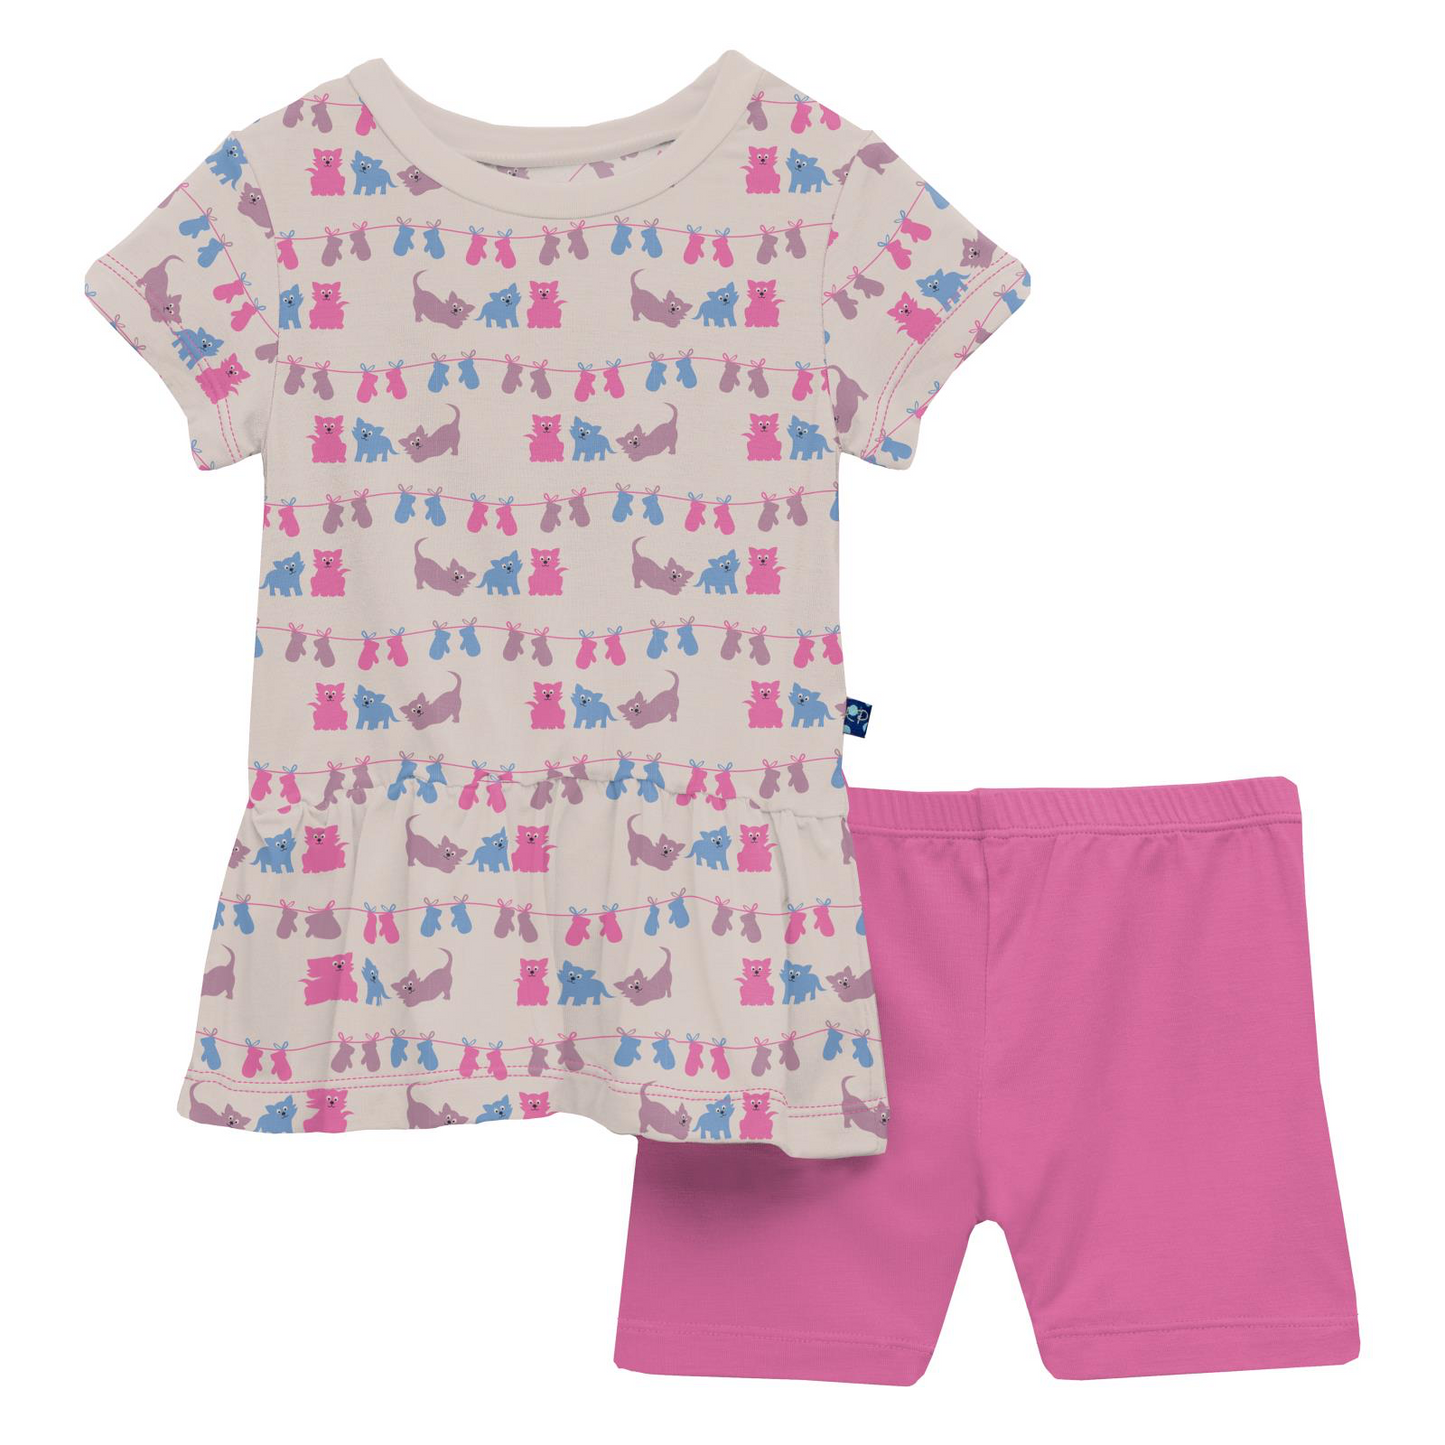 Latte 3 Little Kittens S/S Playtime Outfit Set